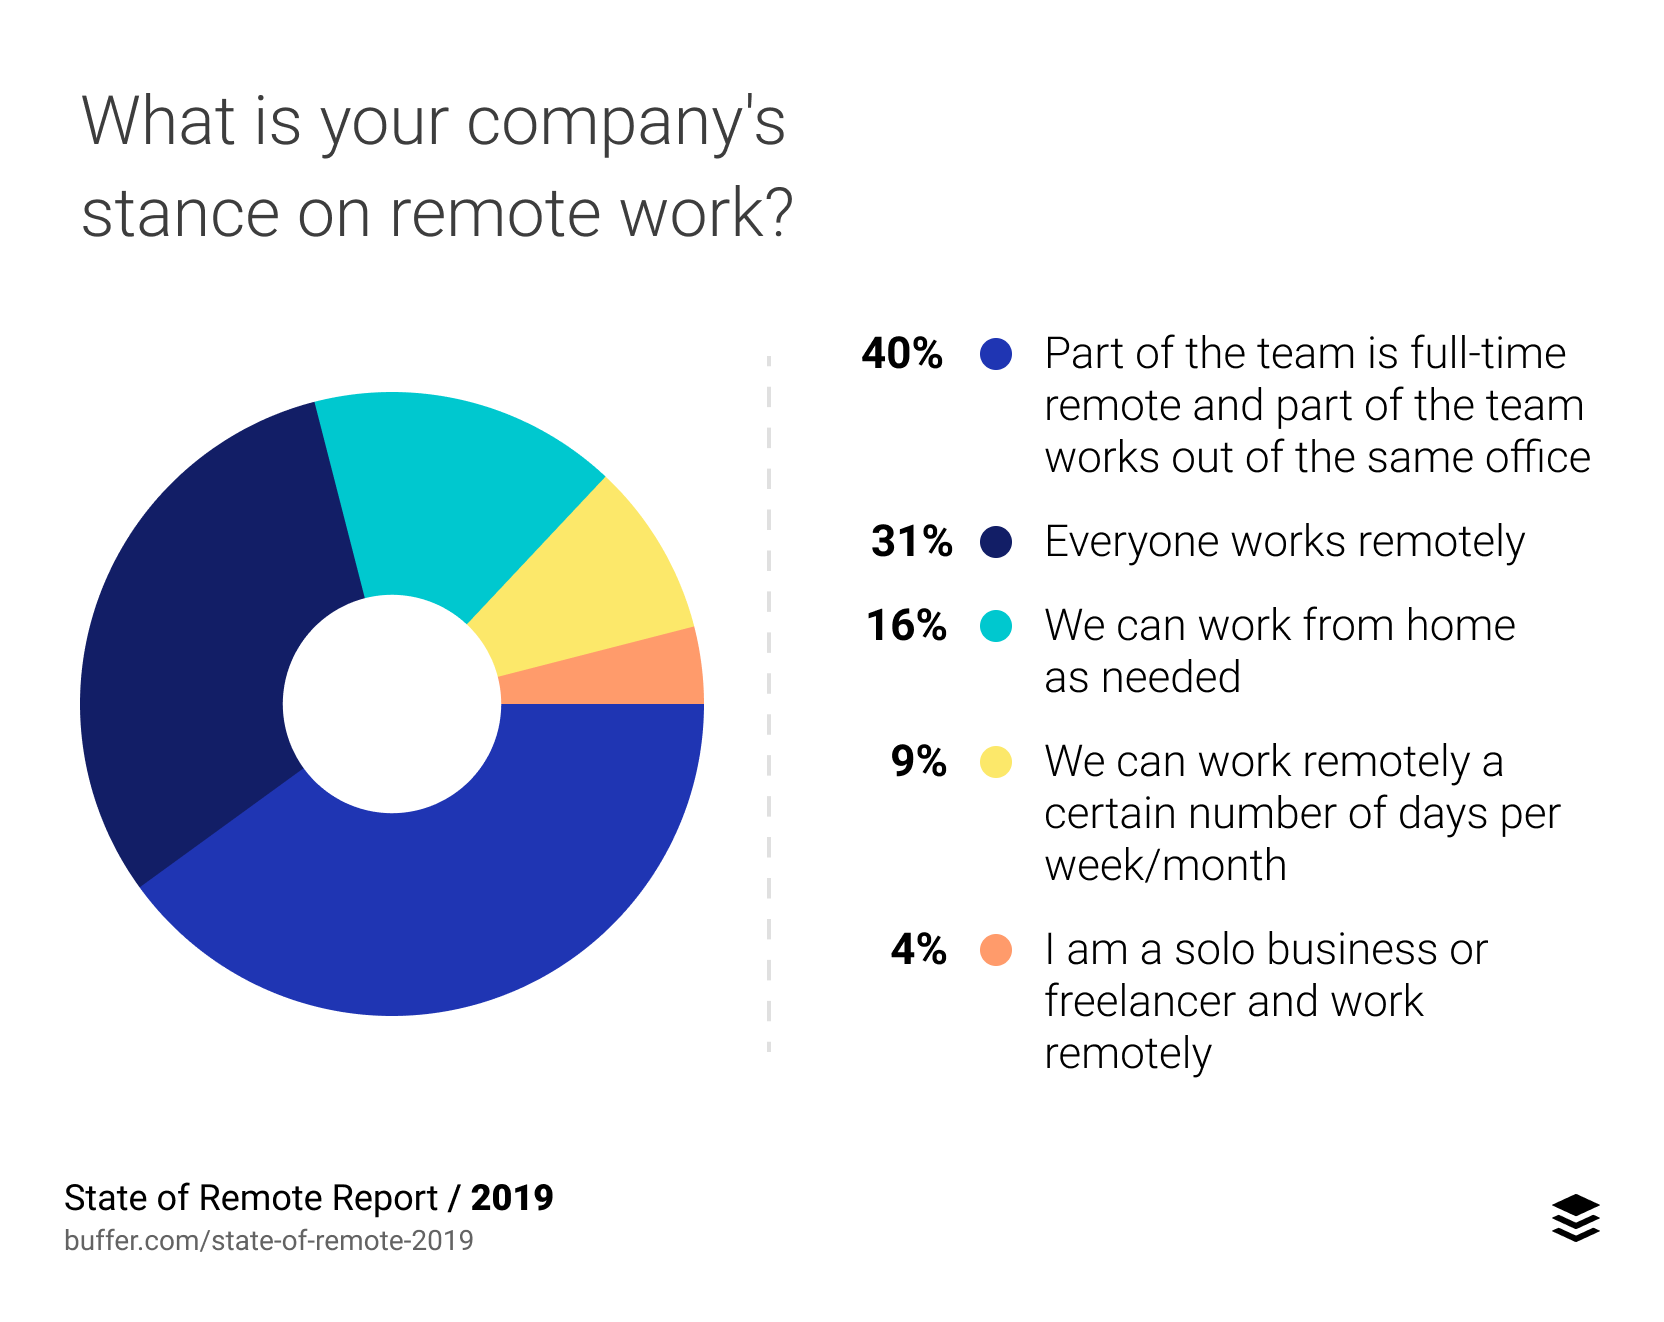 What is your company's stance on remote work